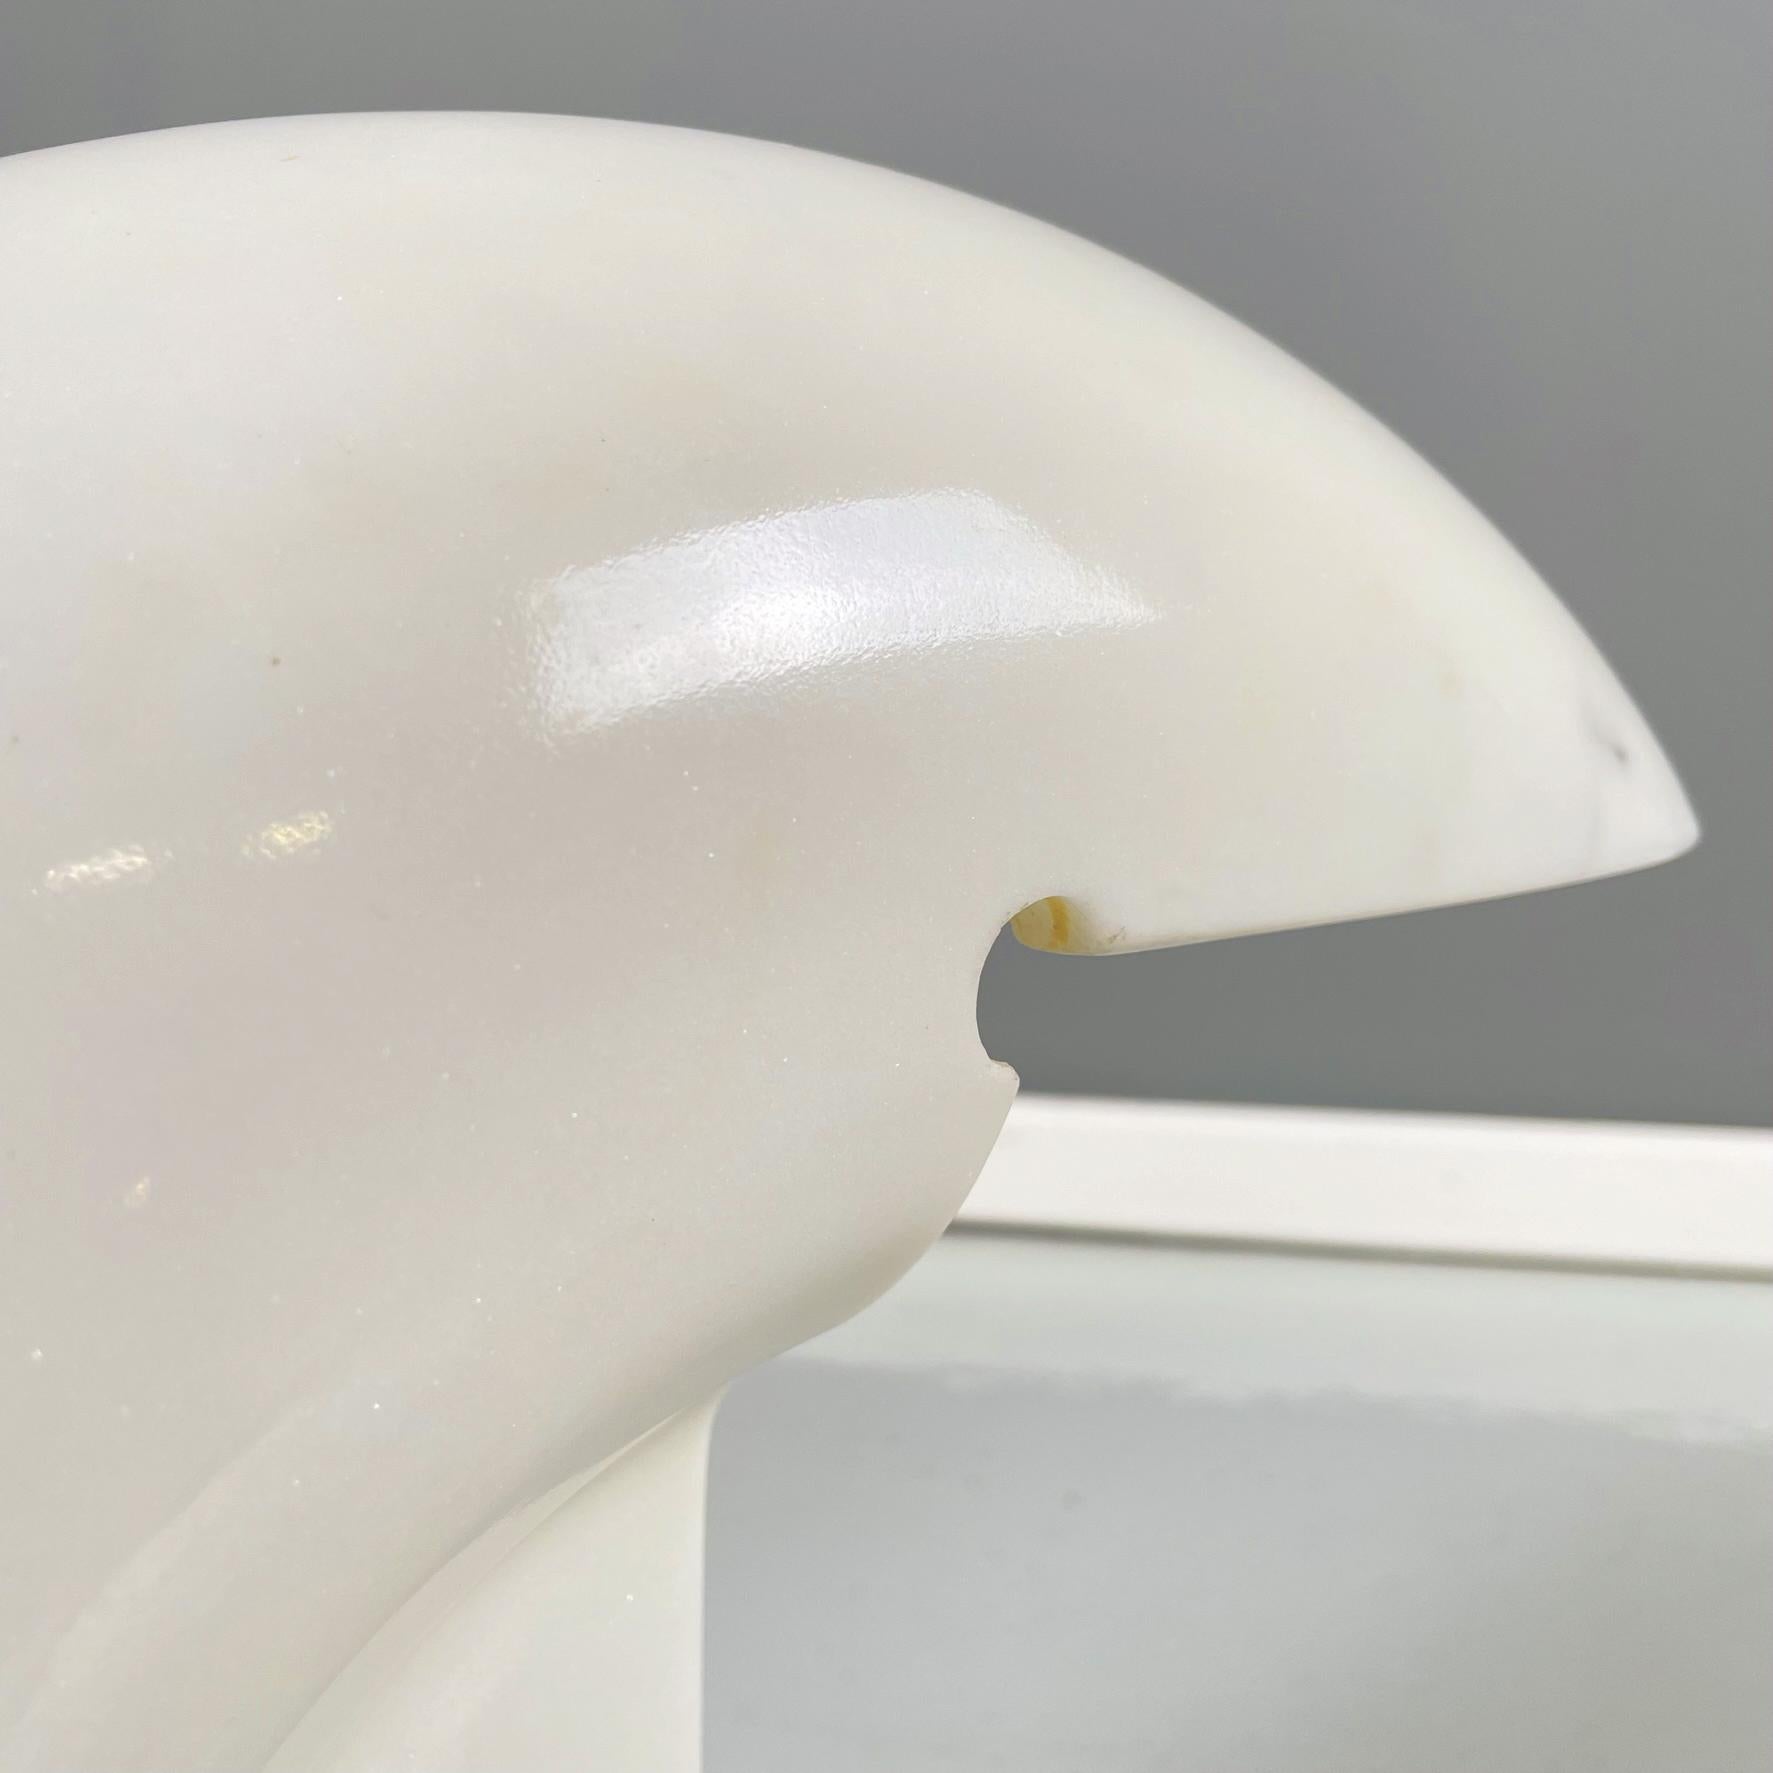 Italian Modern Carrara Marble Table Lamp Biagio by Tobia Scarpa for Flos, 1970s For Sale 6